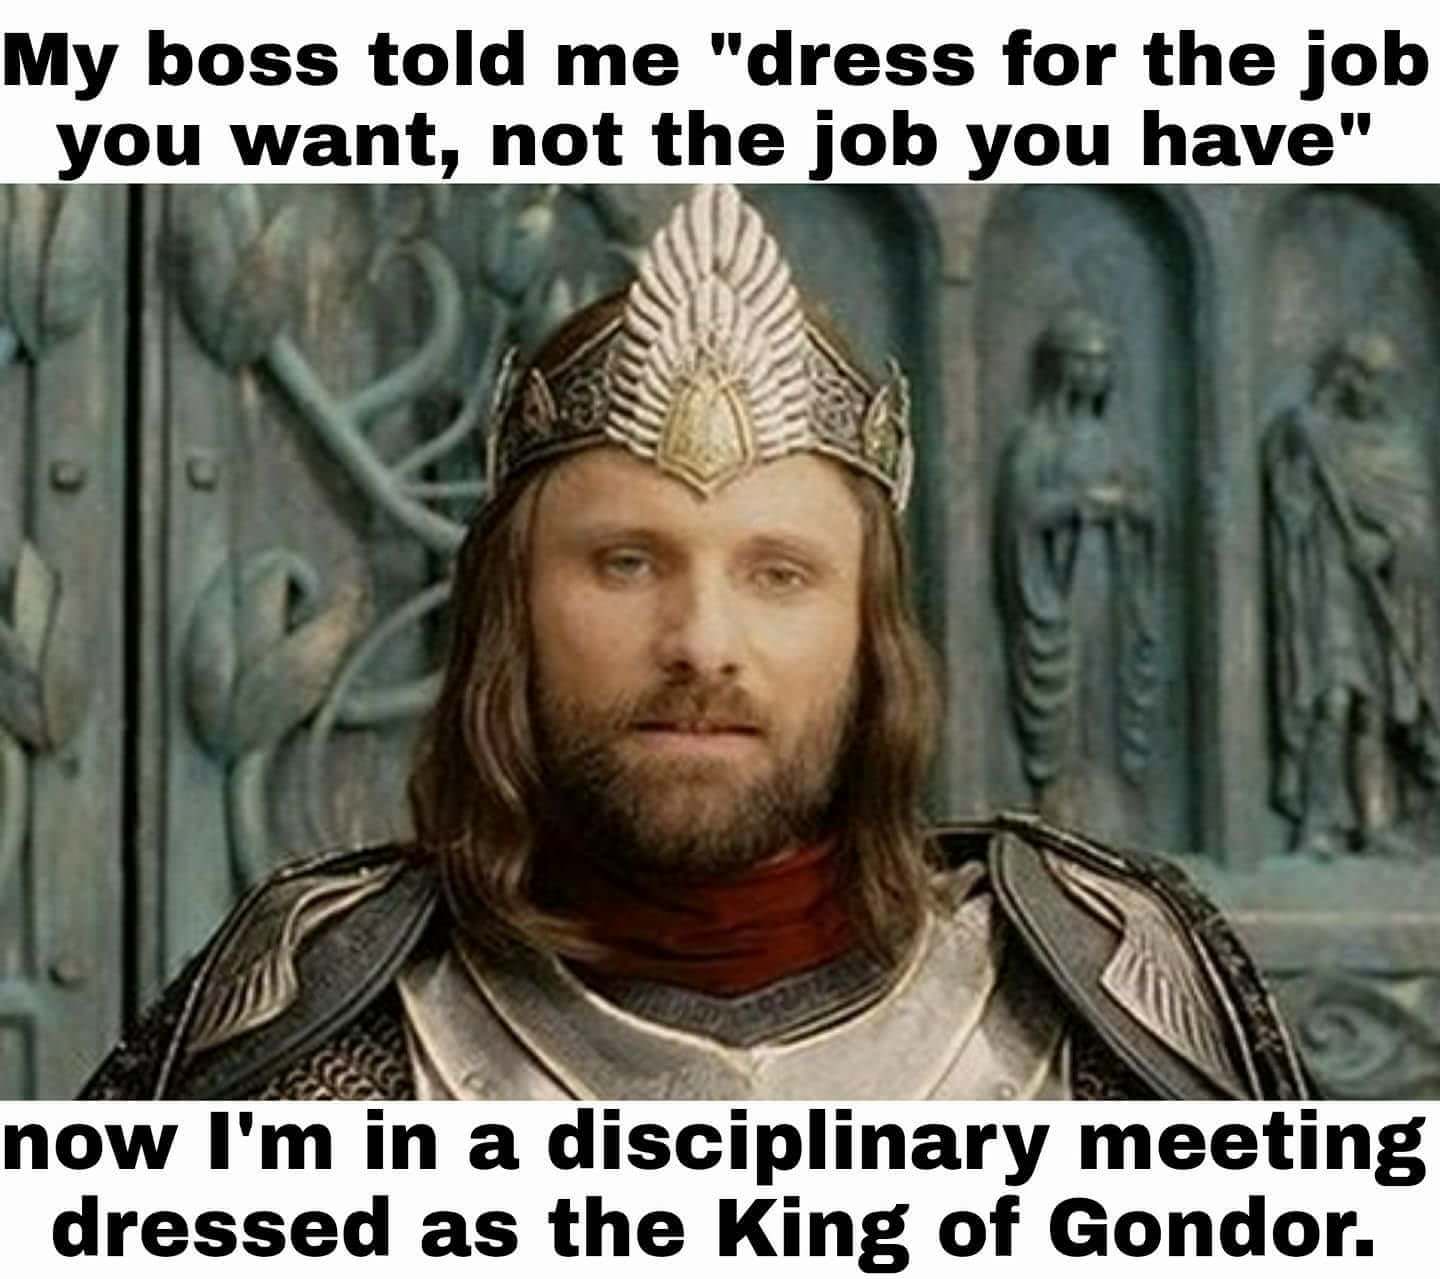 memes - gondor memes - My boss told me "dress for the job you want, not the job you have" now I'm in a disciplinary meeting dressed as the King of Gondor.